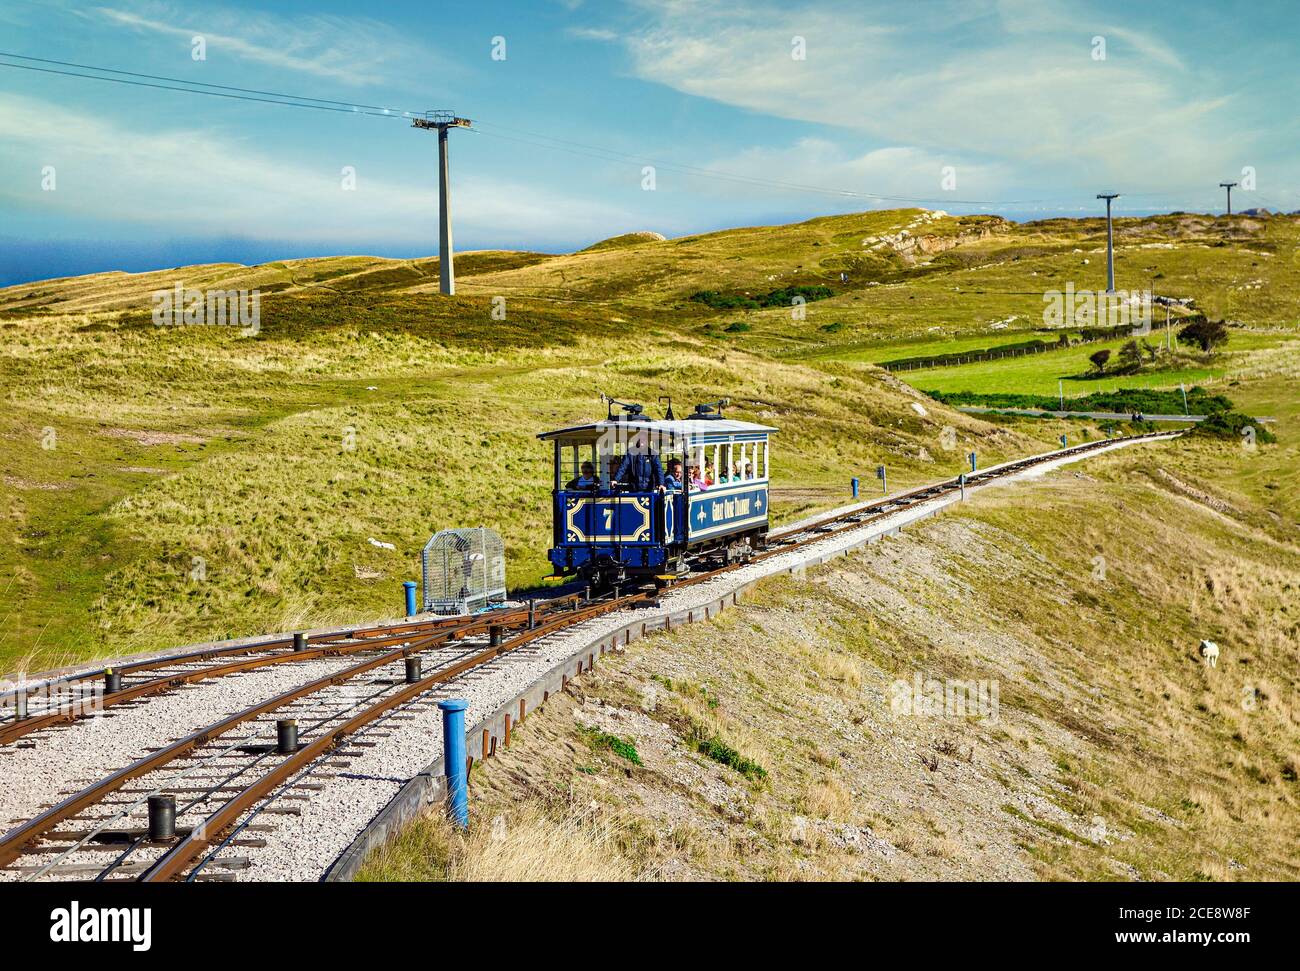 Tram No. 7 en route from Llandudno Victoria Station to the summit station on Cable hauled Great Orme Tramway in Llandudno north Wales UK Stock Photo